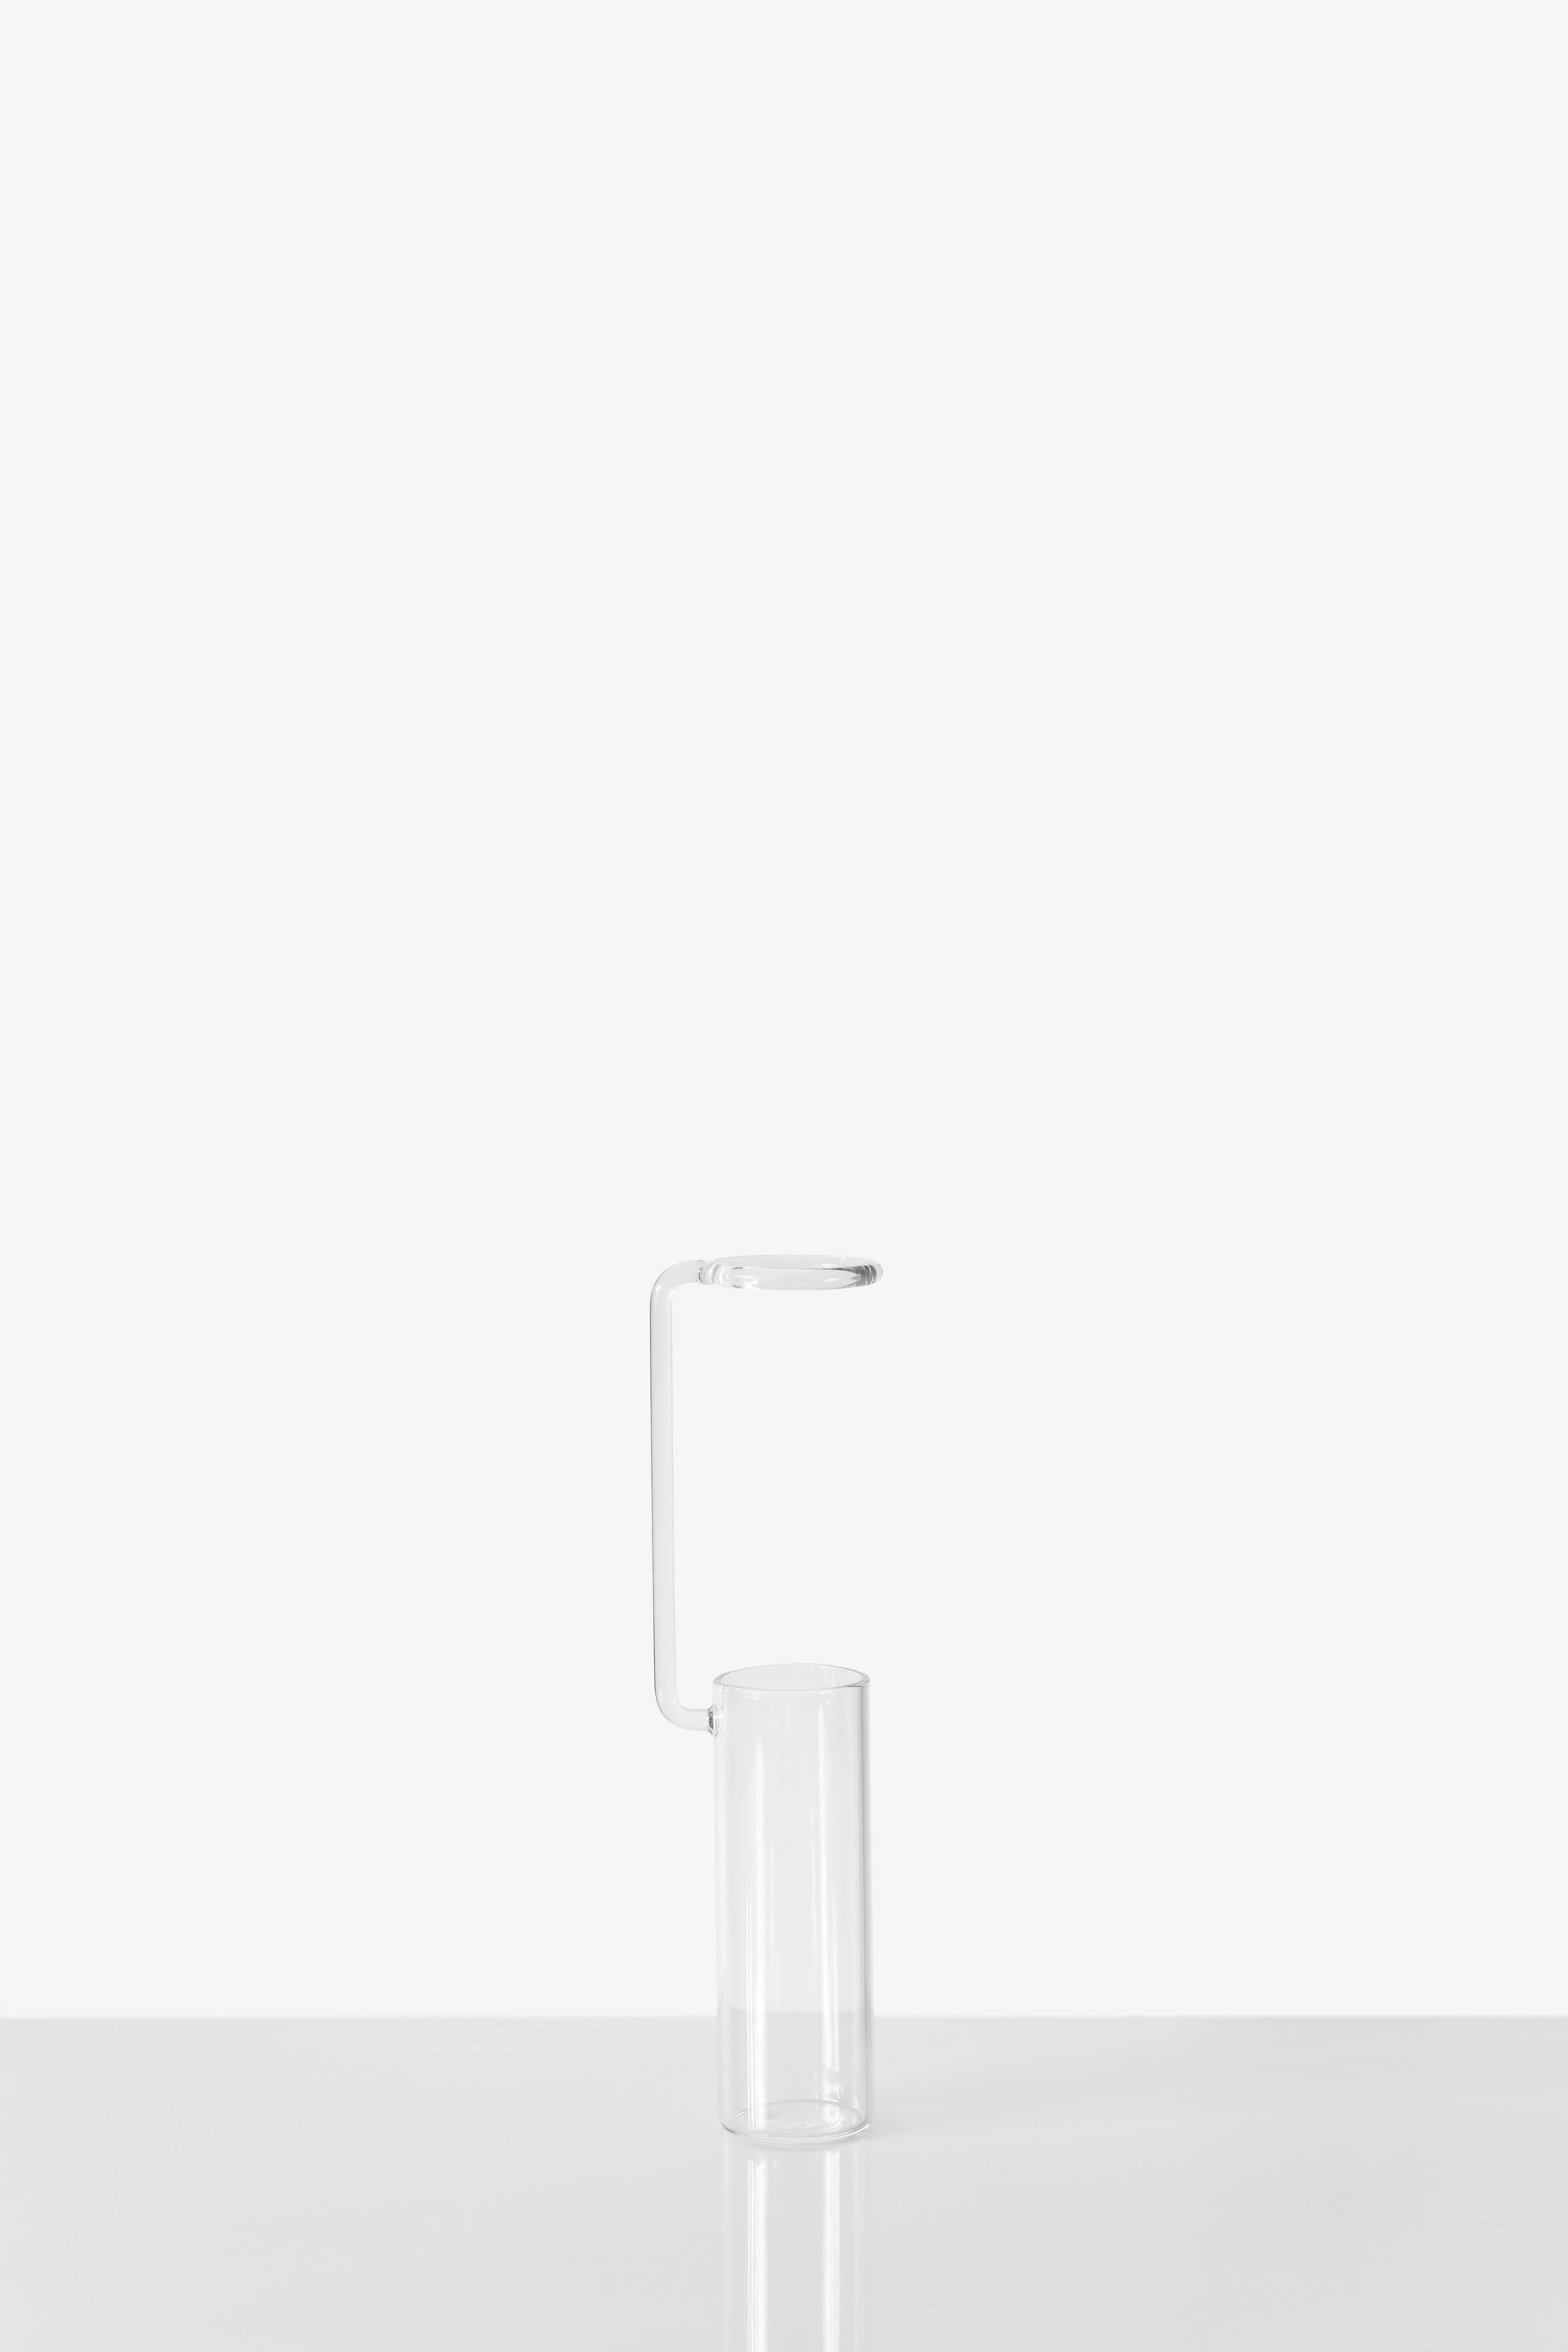 Vase designed by Adolfo Abejon

Measures: 63 × 42 × 232 mm (L × W × H). Glass.

We offer free worldwide shipping for this piece.

Melancholia is a series of handmade glass vases. Inspired by laboratory test tubes, they turn flowers into study and